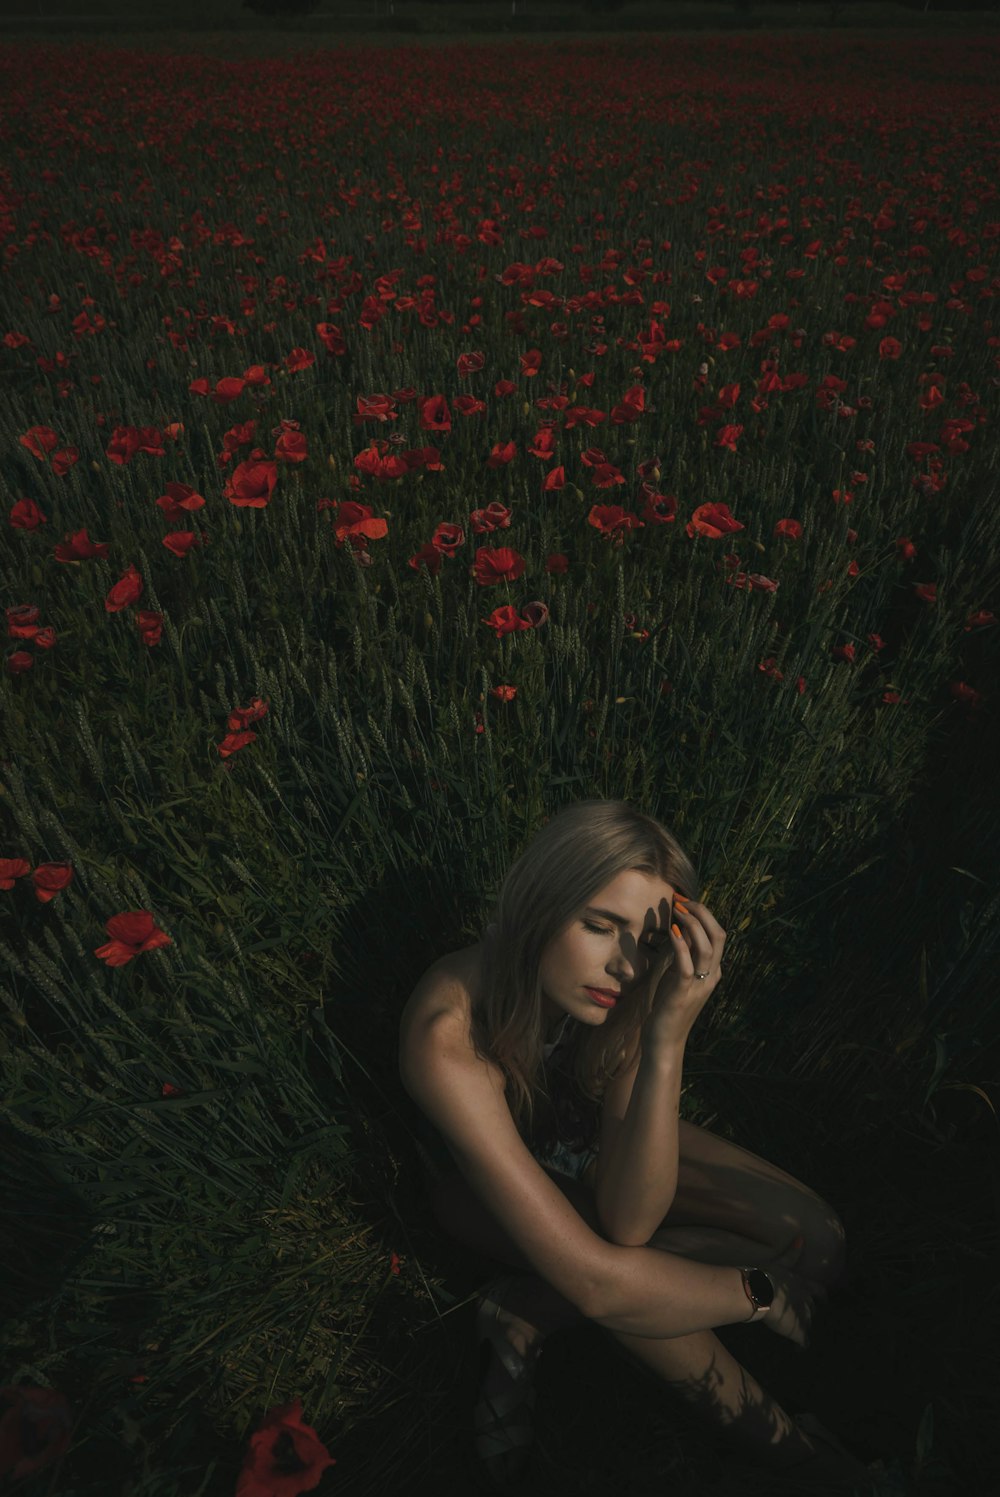 unknown person sitting beside green-leafed plant with red flowers